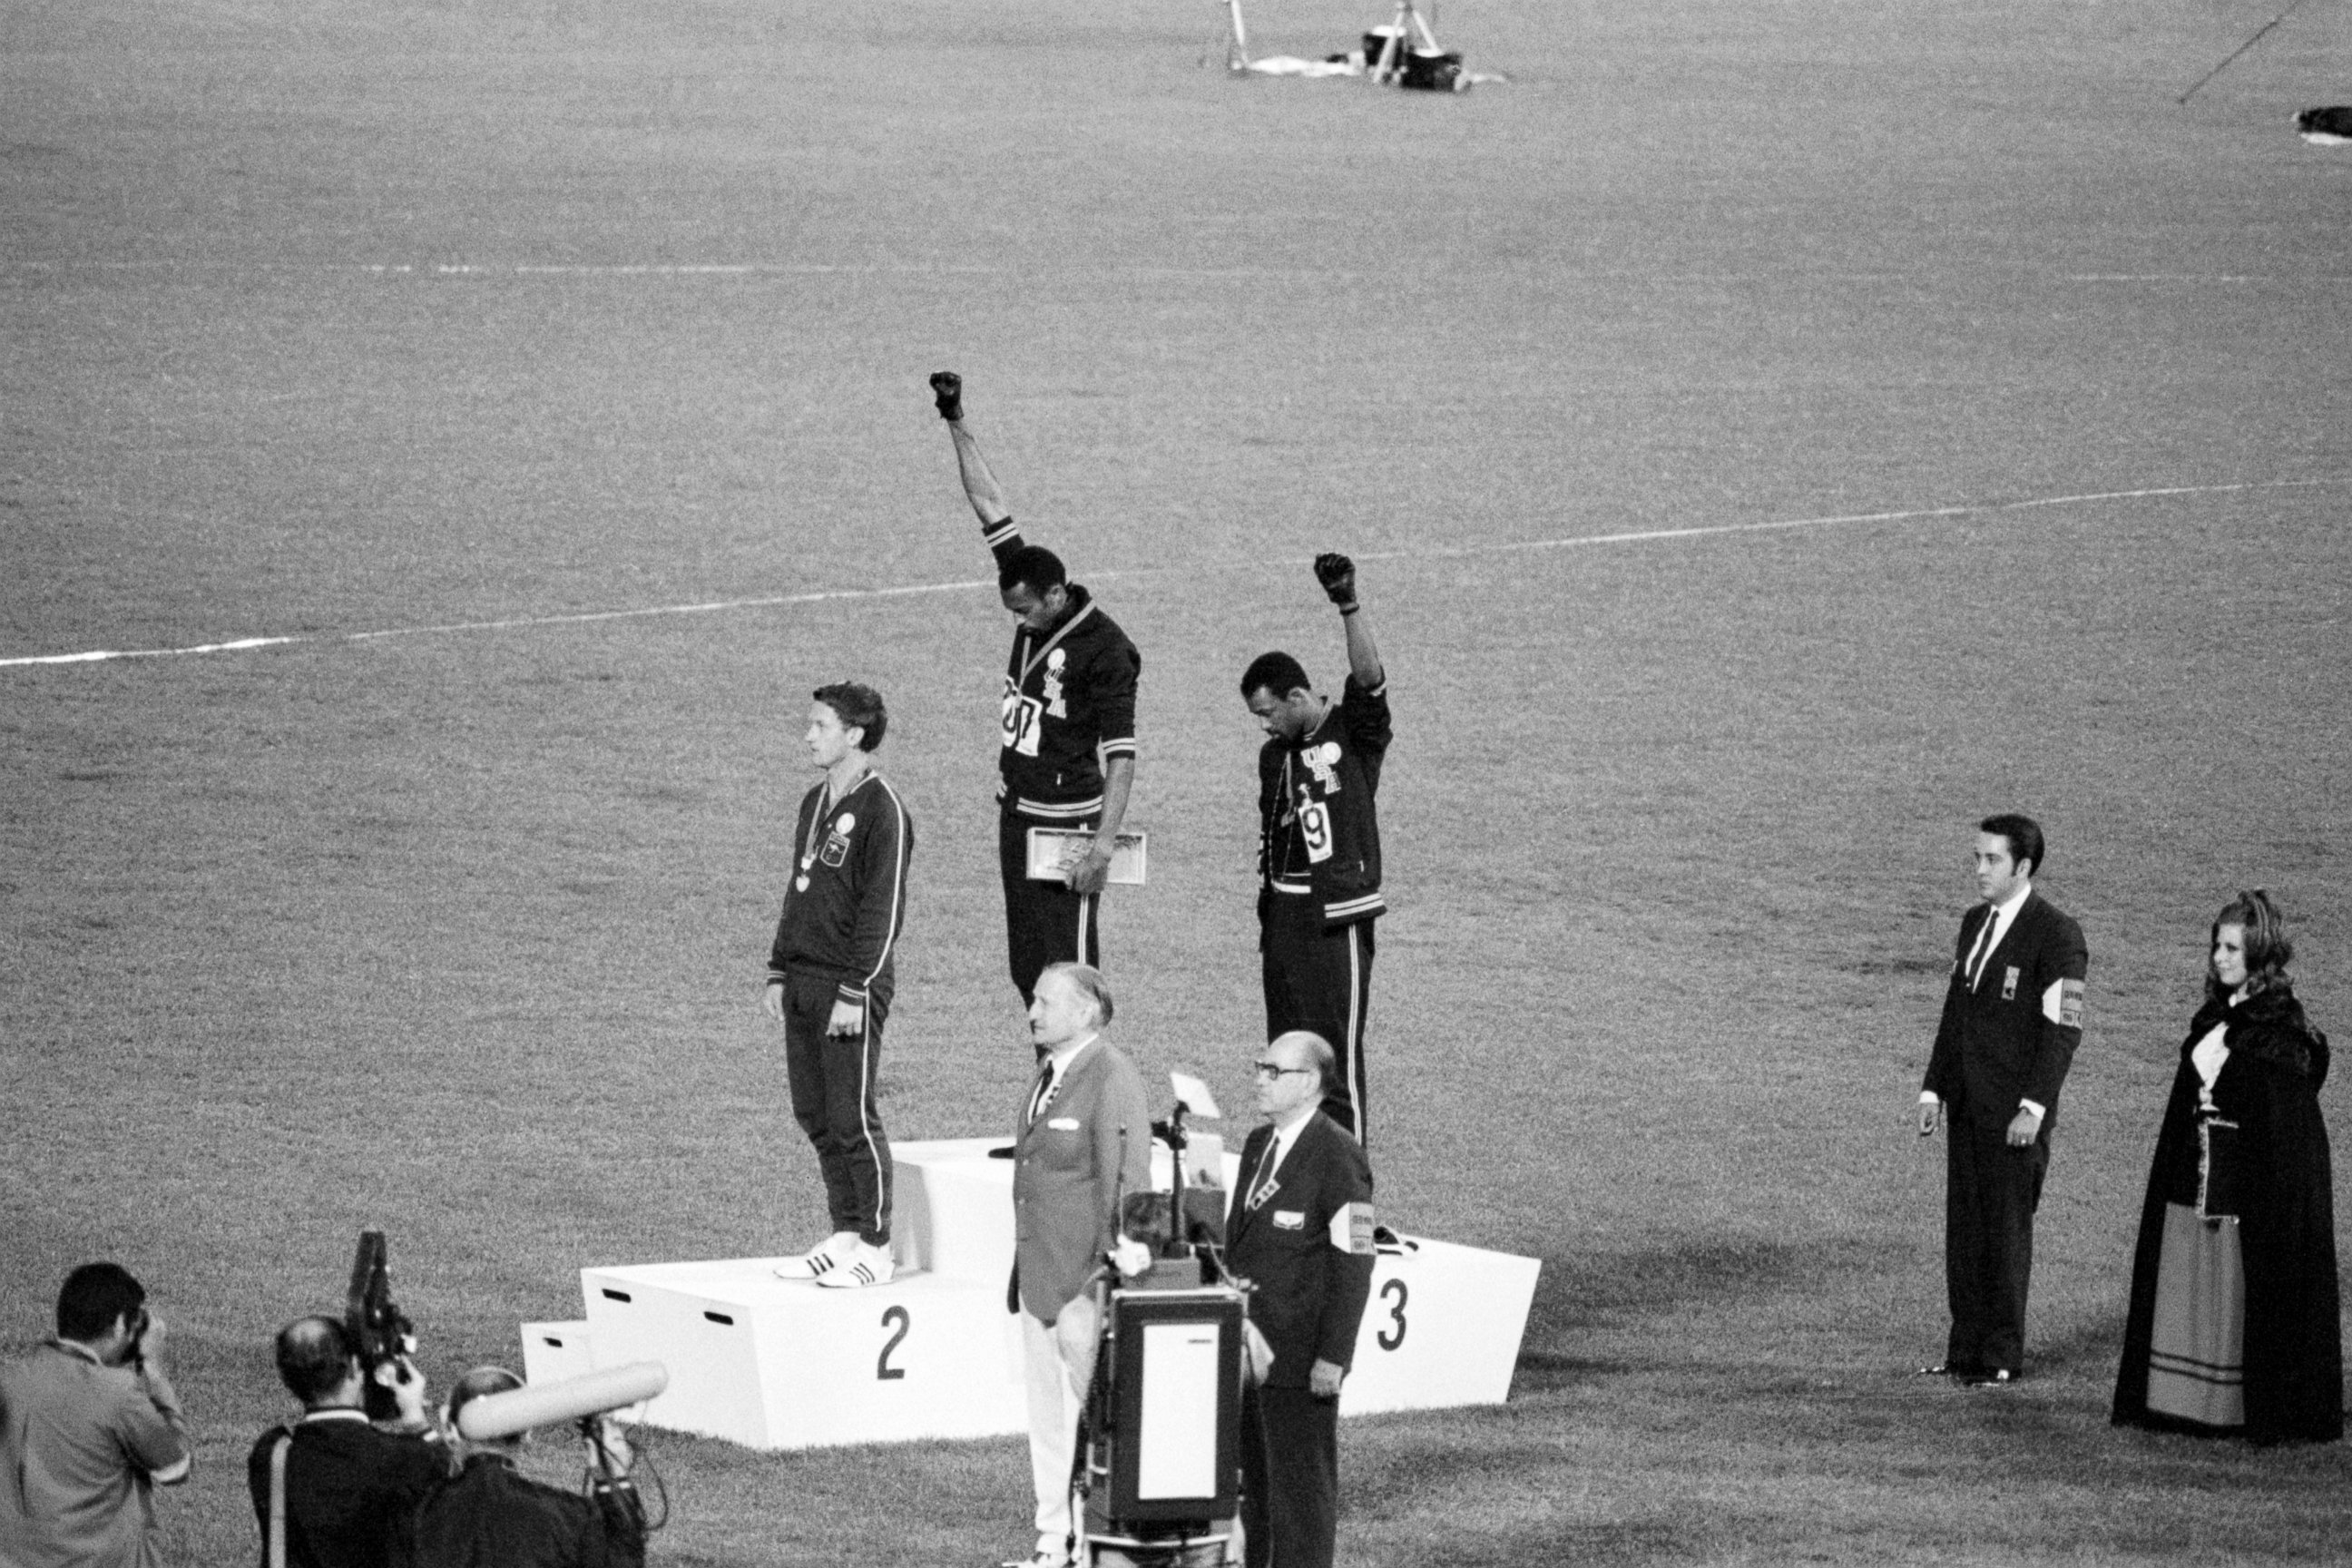 PHOTO: Tommie Smith and John Carlos, gold and bronze medalists in the 200-meter run at the 1968 Olympic Games, engage in a victory stand protest against unfair treatment of blacks in the United States.